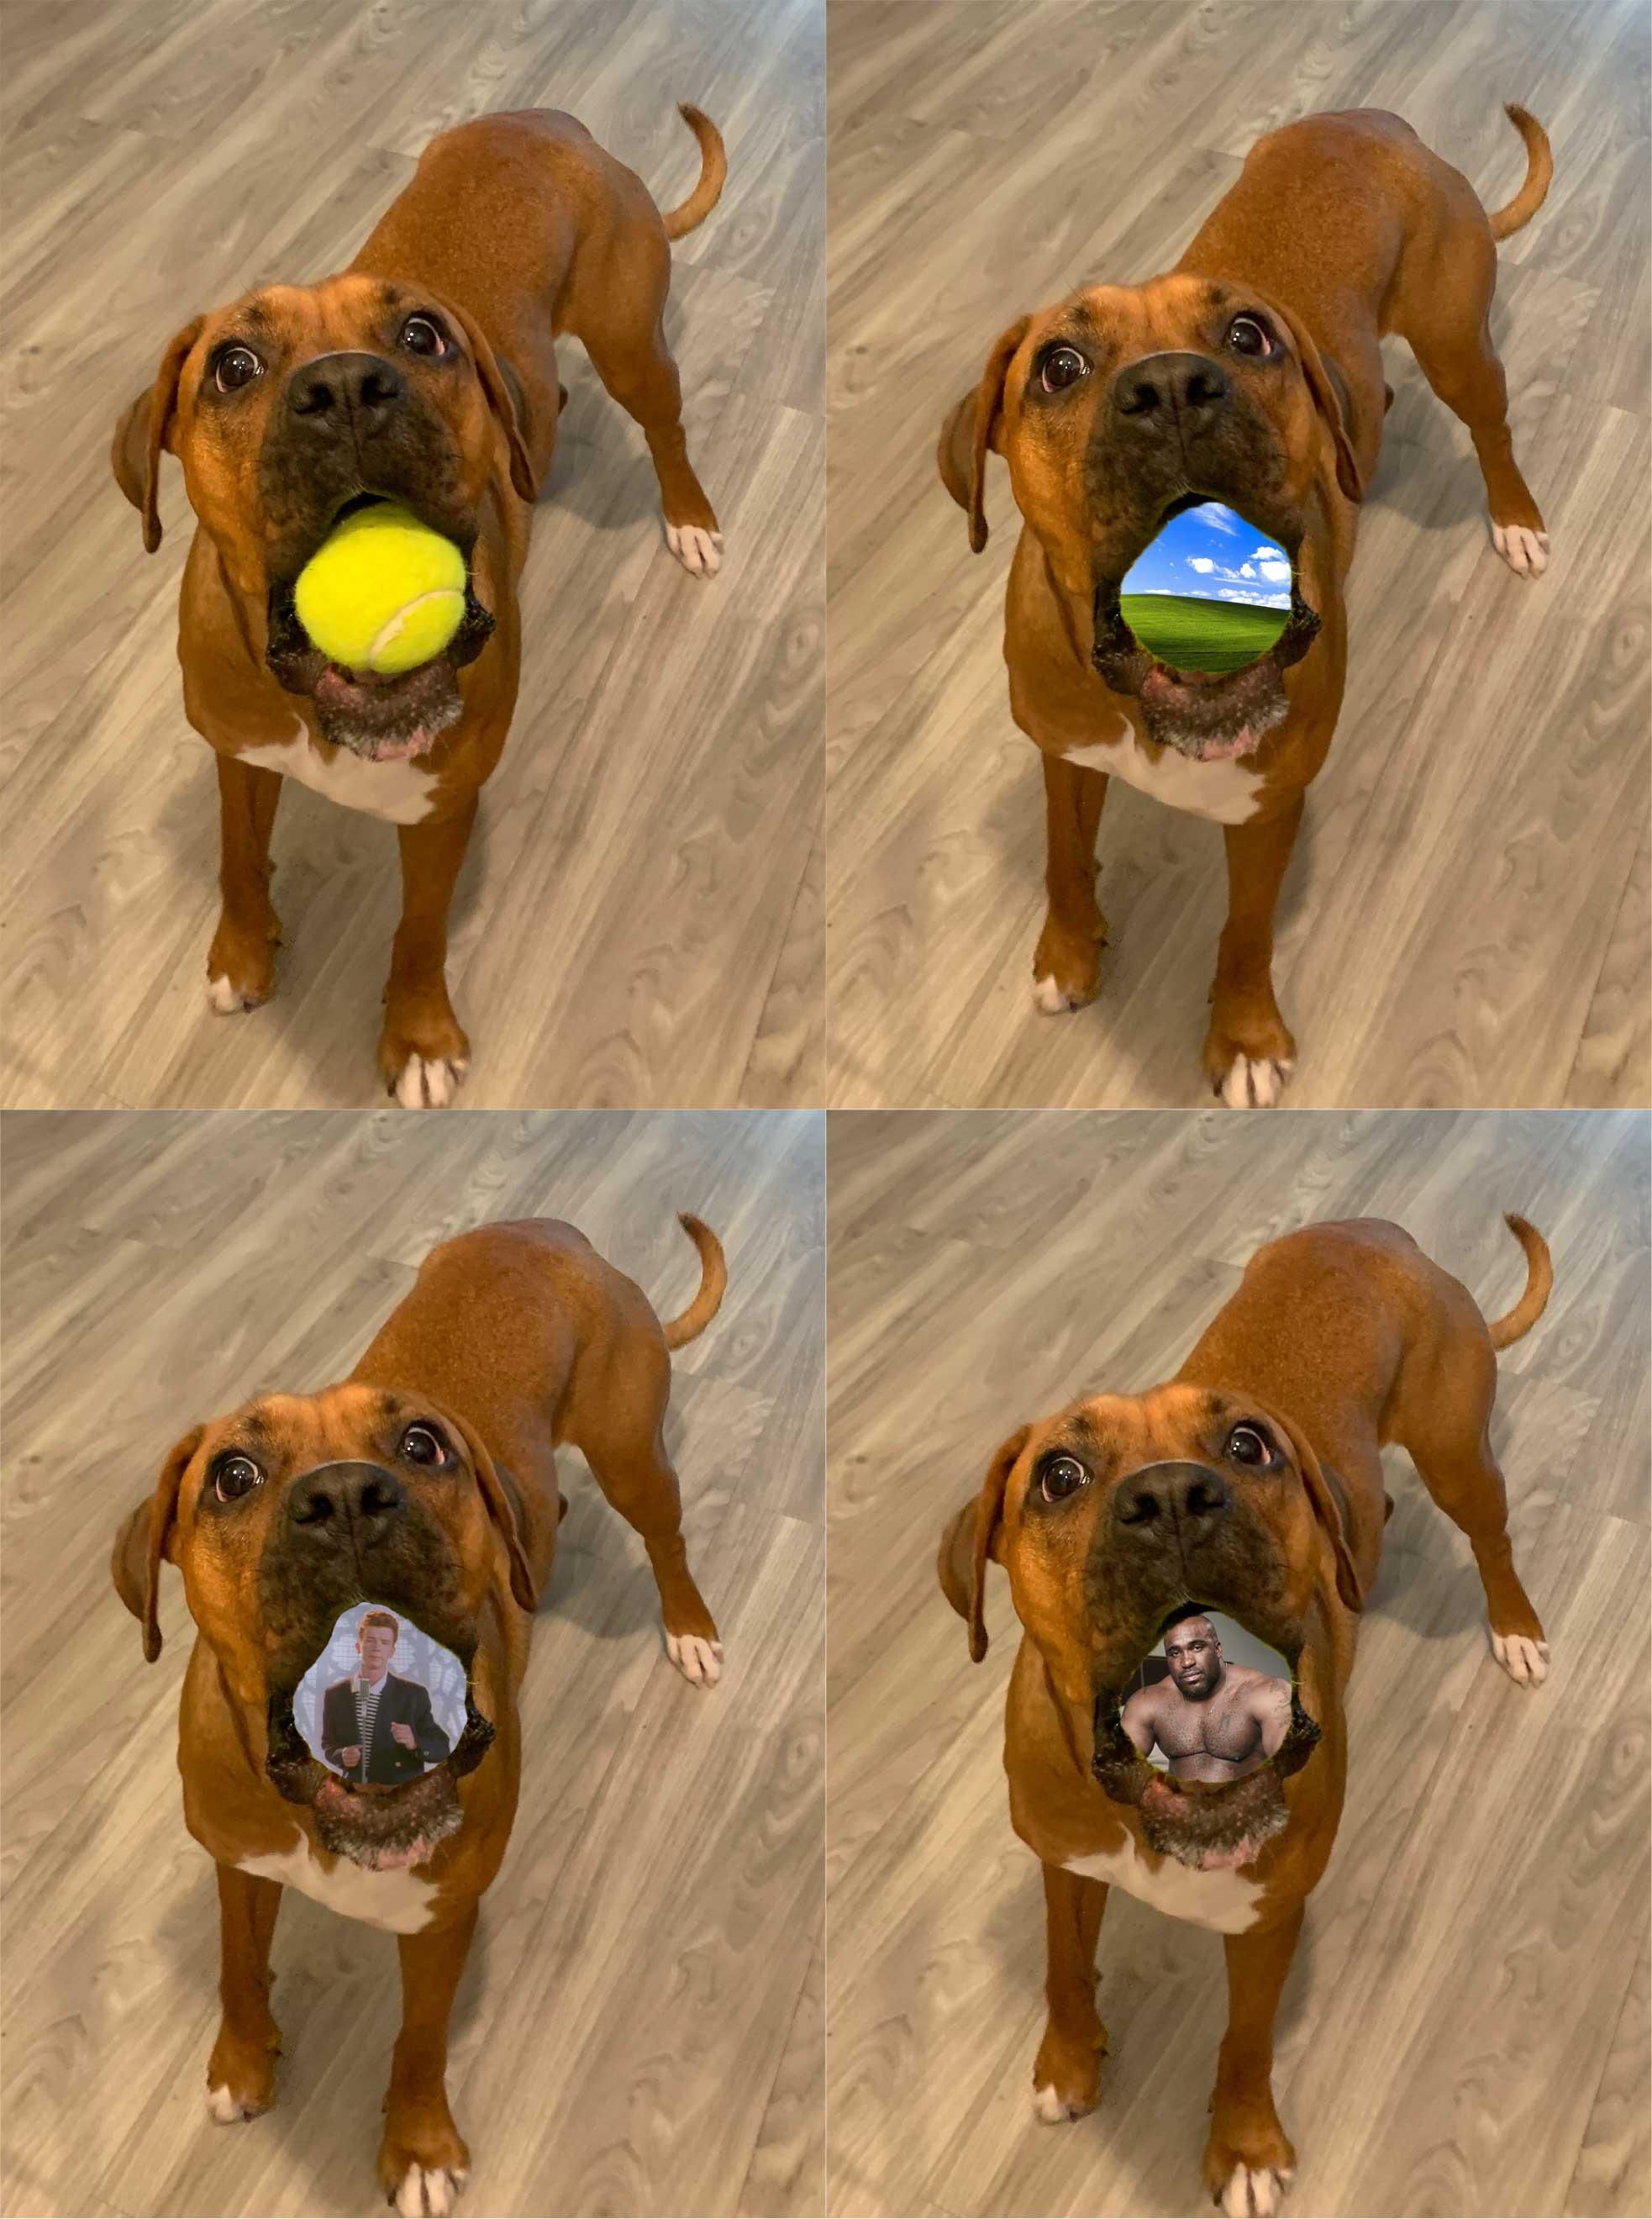 I used my dog’s tennis ball as a green screen.